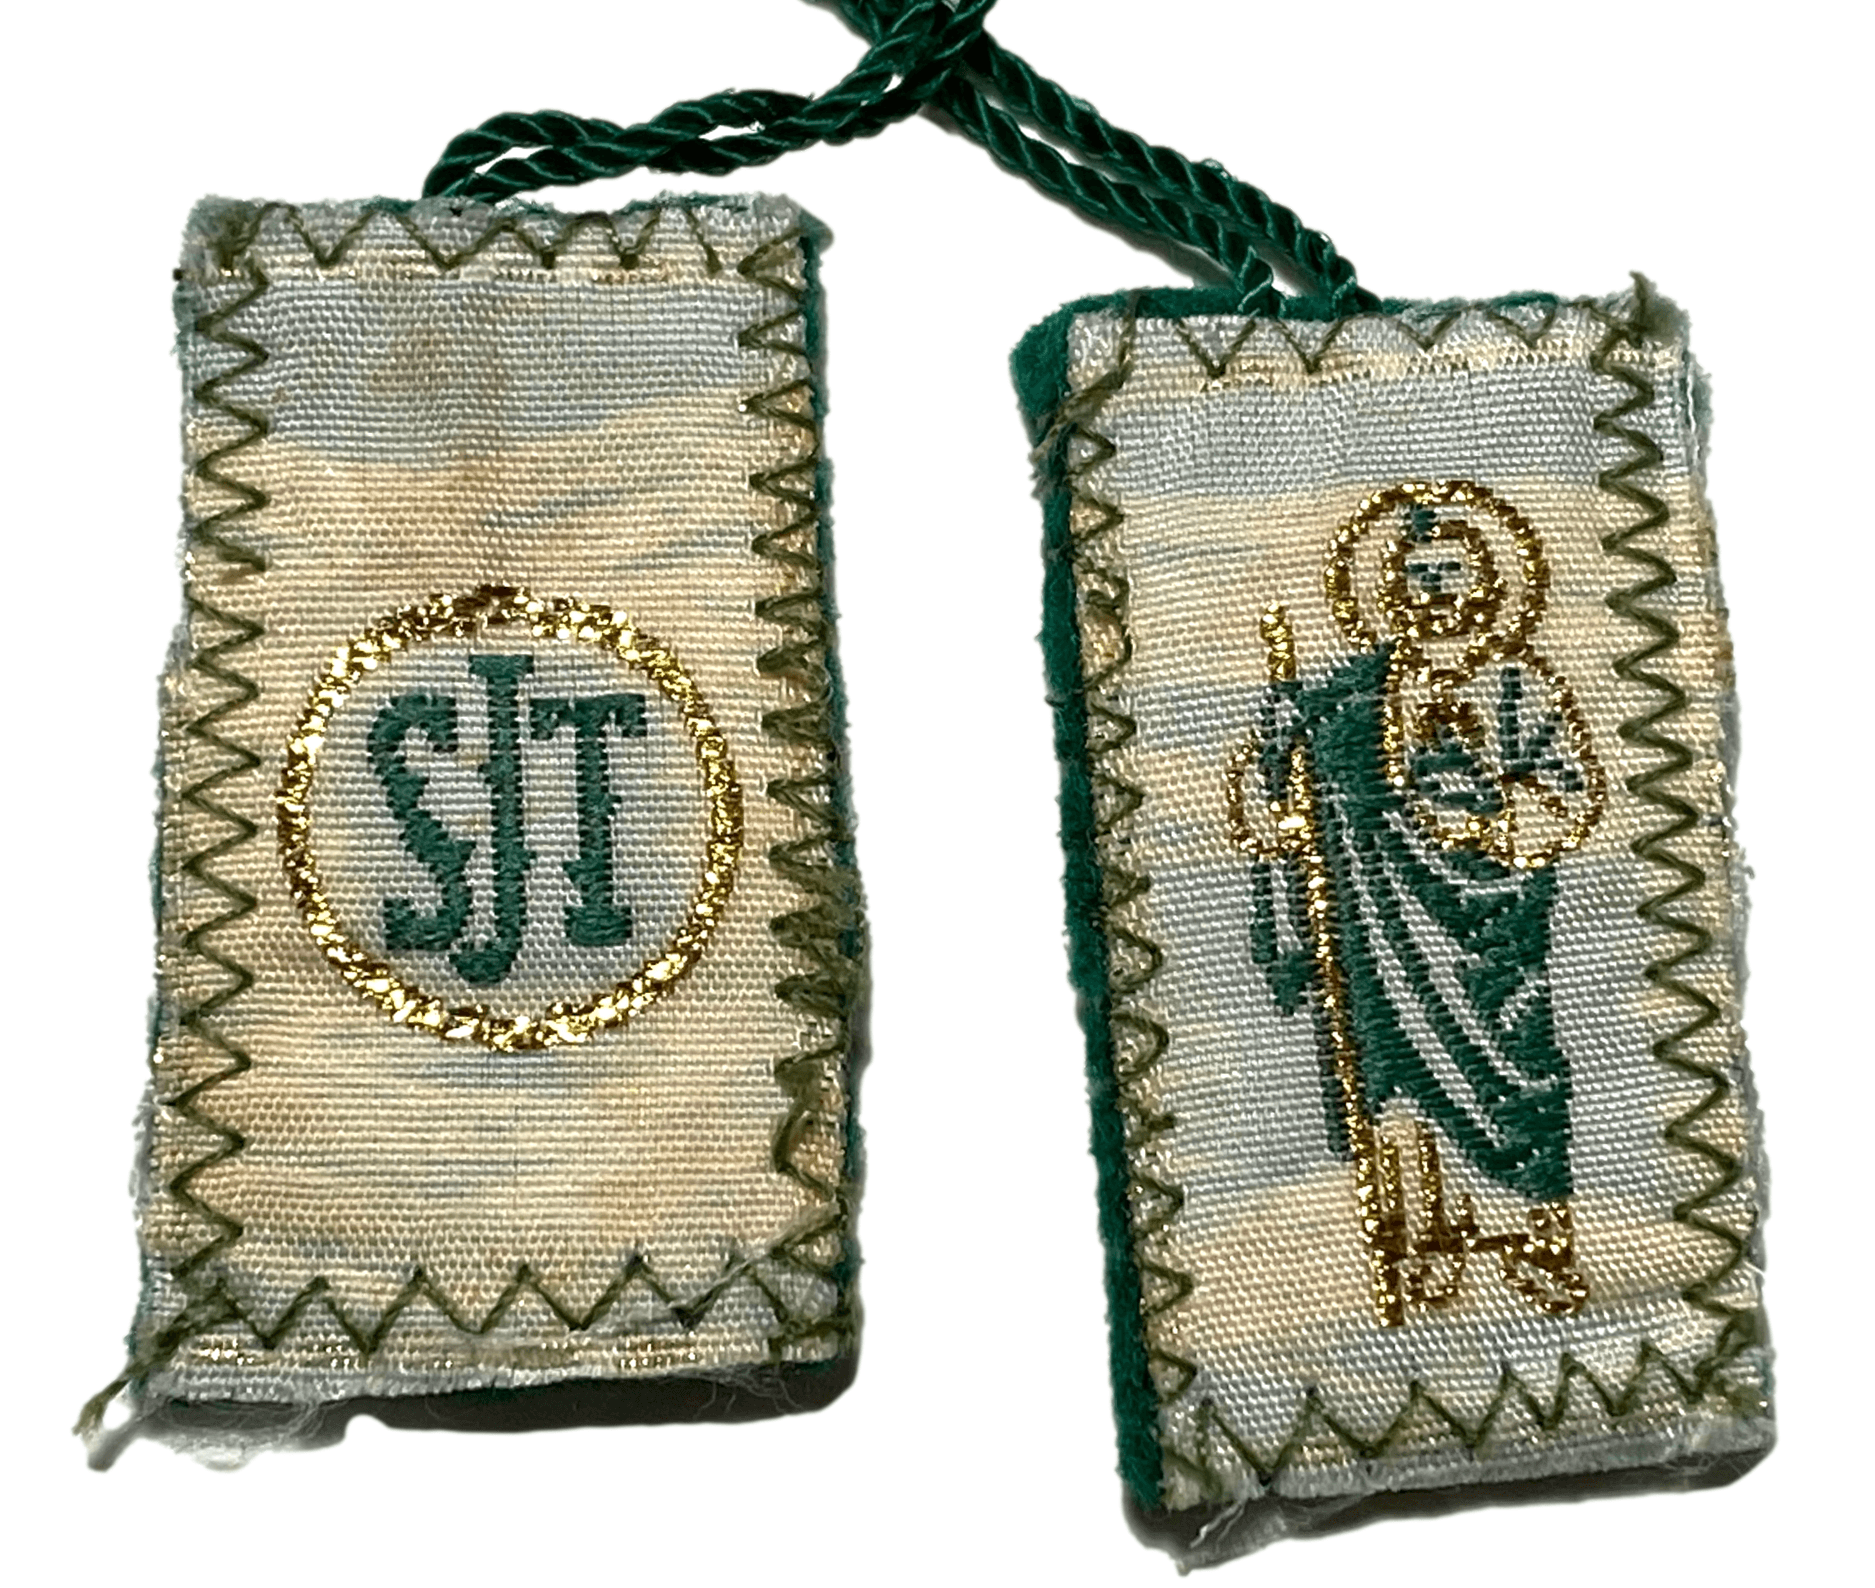 Scapular Saint Jude Green Nylon Cord 1 1/2 L x 3/4 W Inches - Ysleta Mission Gift Shop- VOTED El Paso's Best Gift Shop